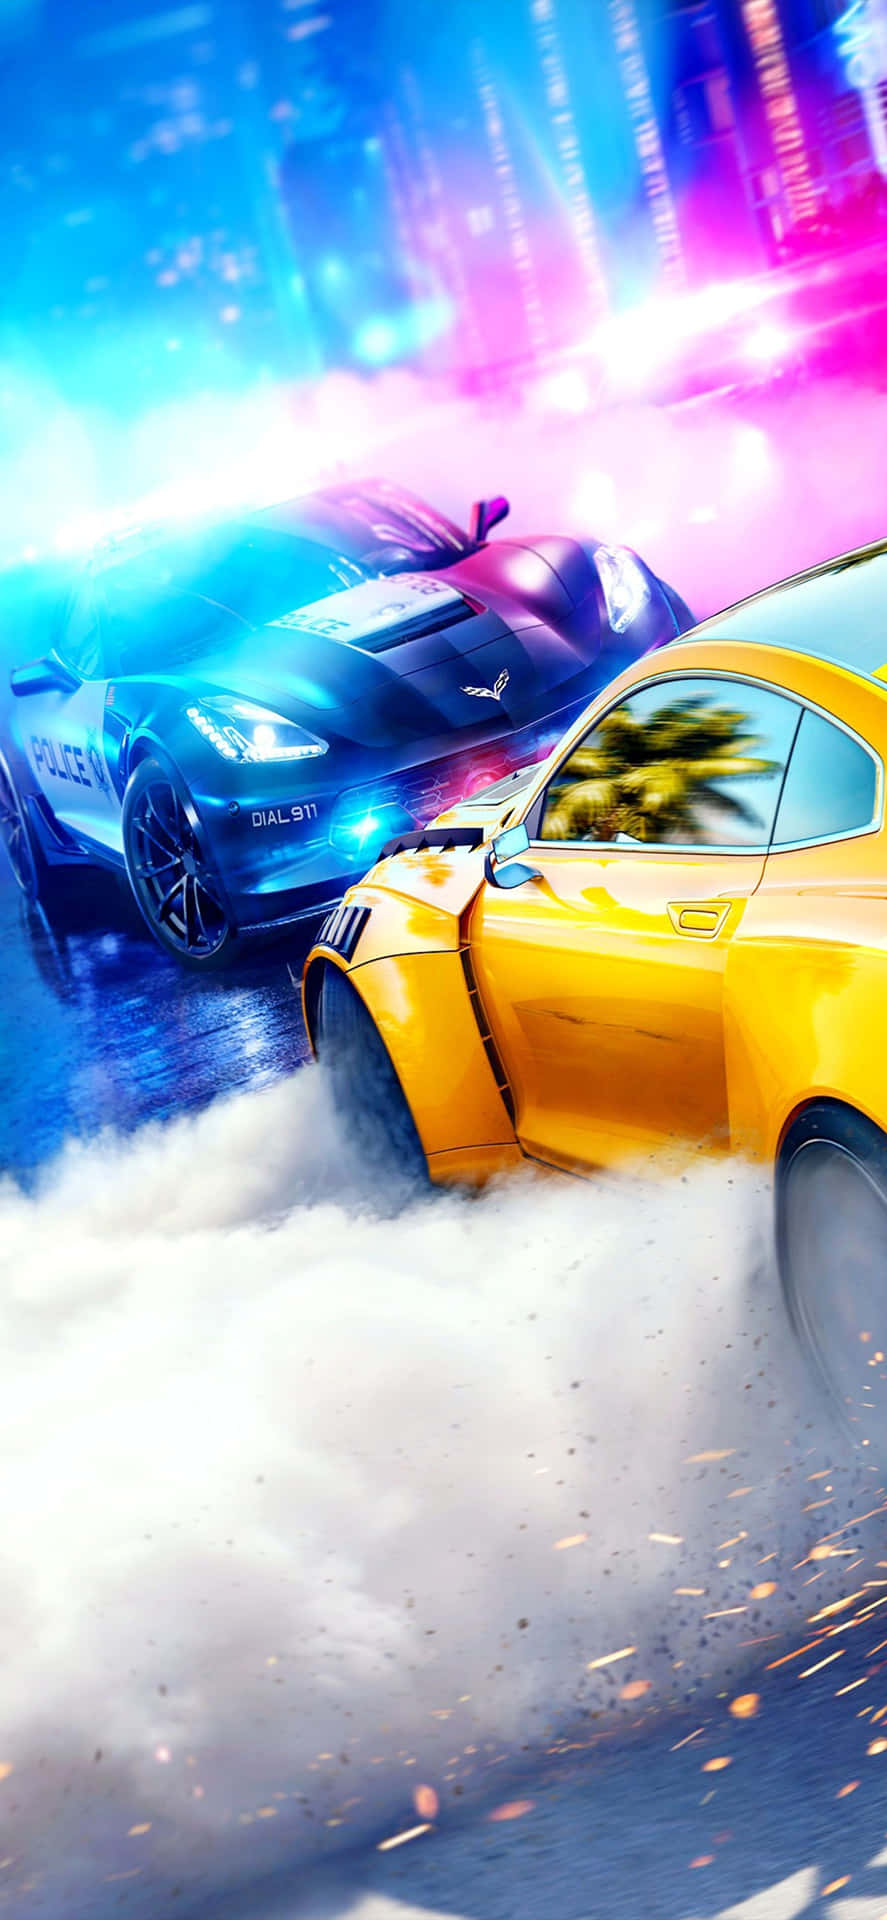 High-Intensity Gaming on iPhone XS Max: Need For Speed Heat Background.